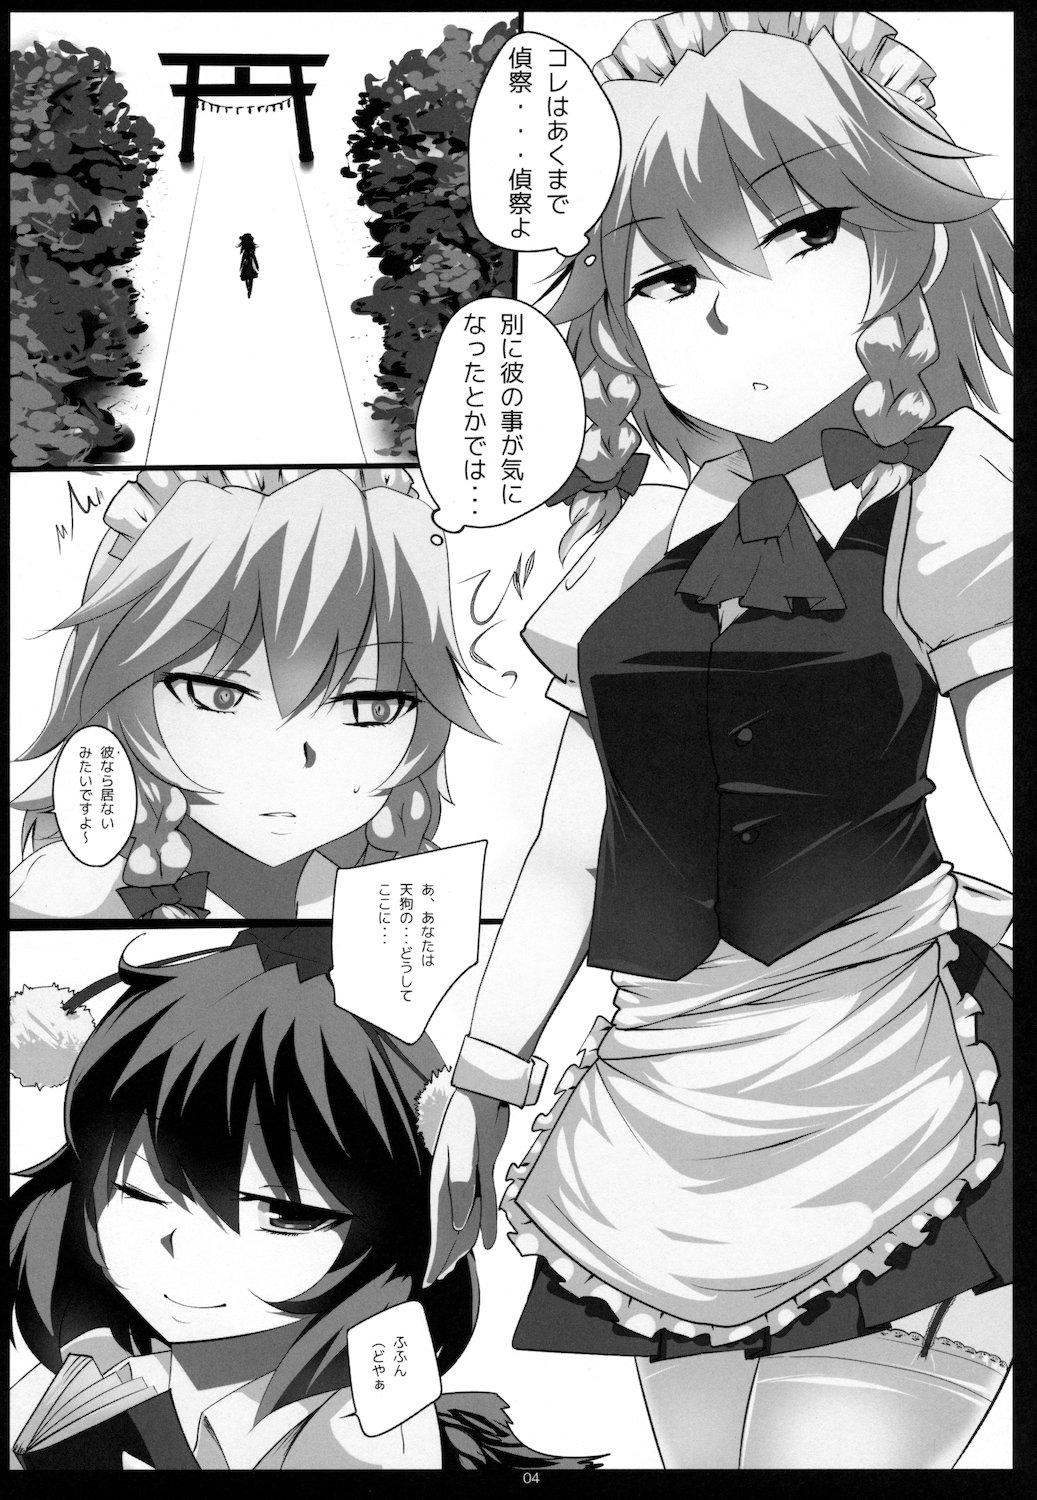 Pussy Fucking Touhou Dere Bitch 7 - Touhou project Thai - Page 4